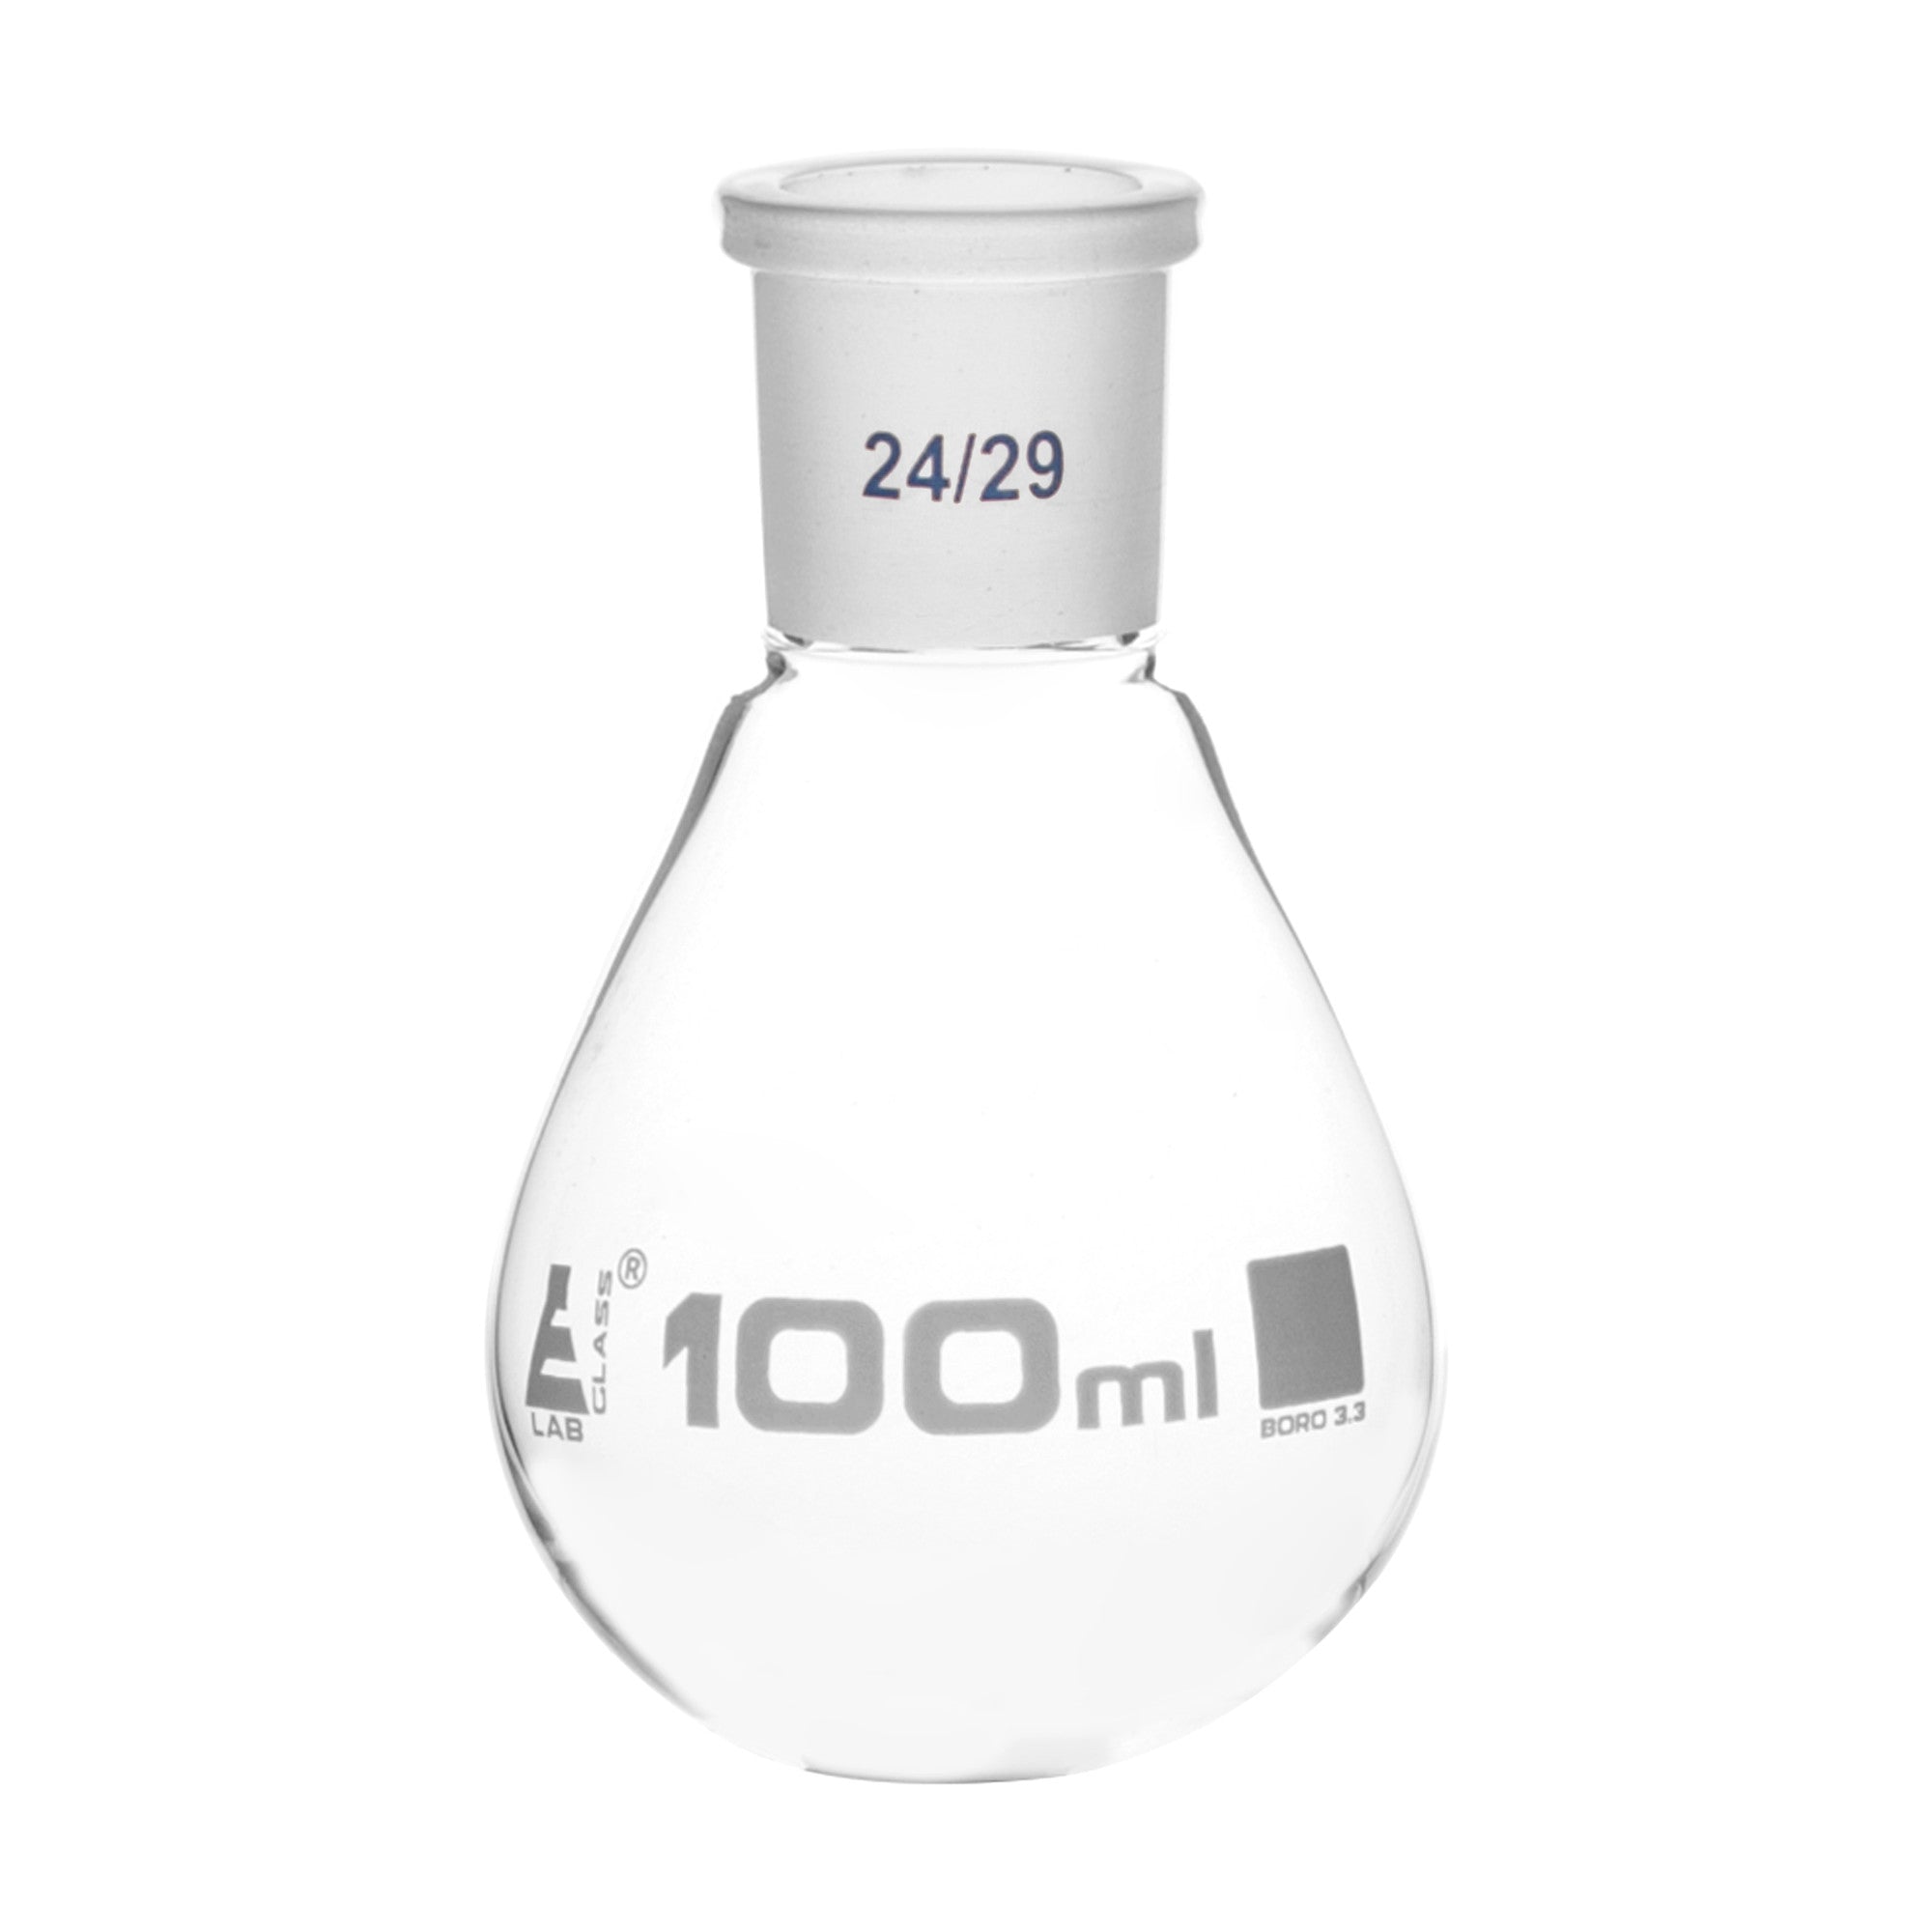 Borosilicate Evaporating Flask with Standard Ground Joint (24/29), 100 ml, Autoclavable